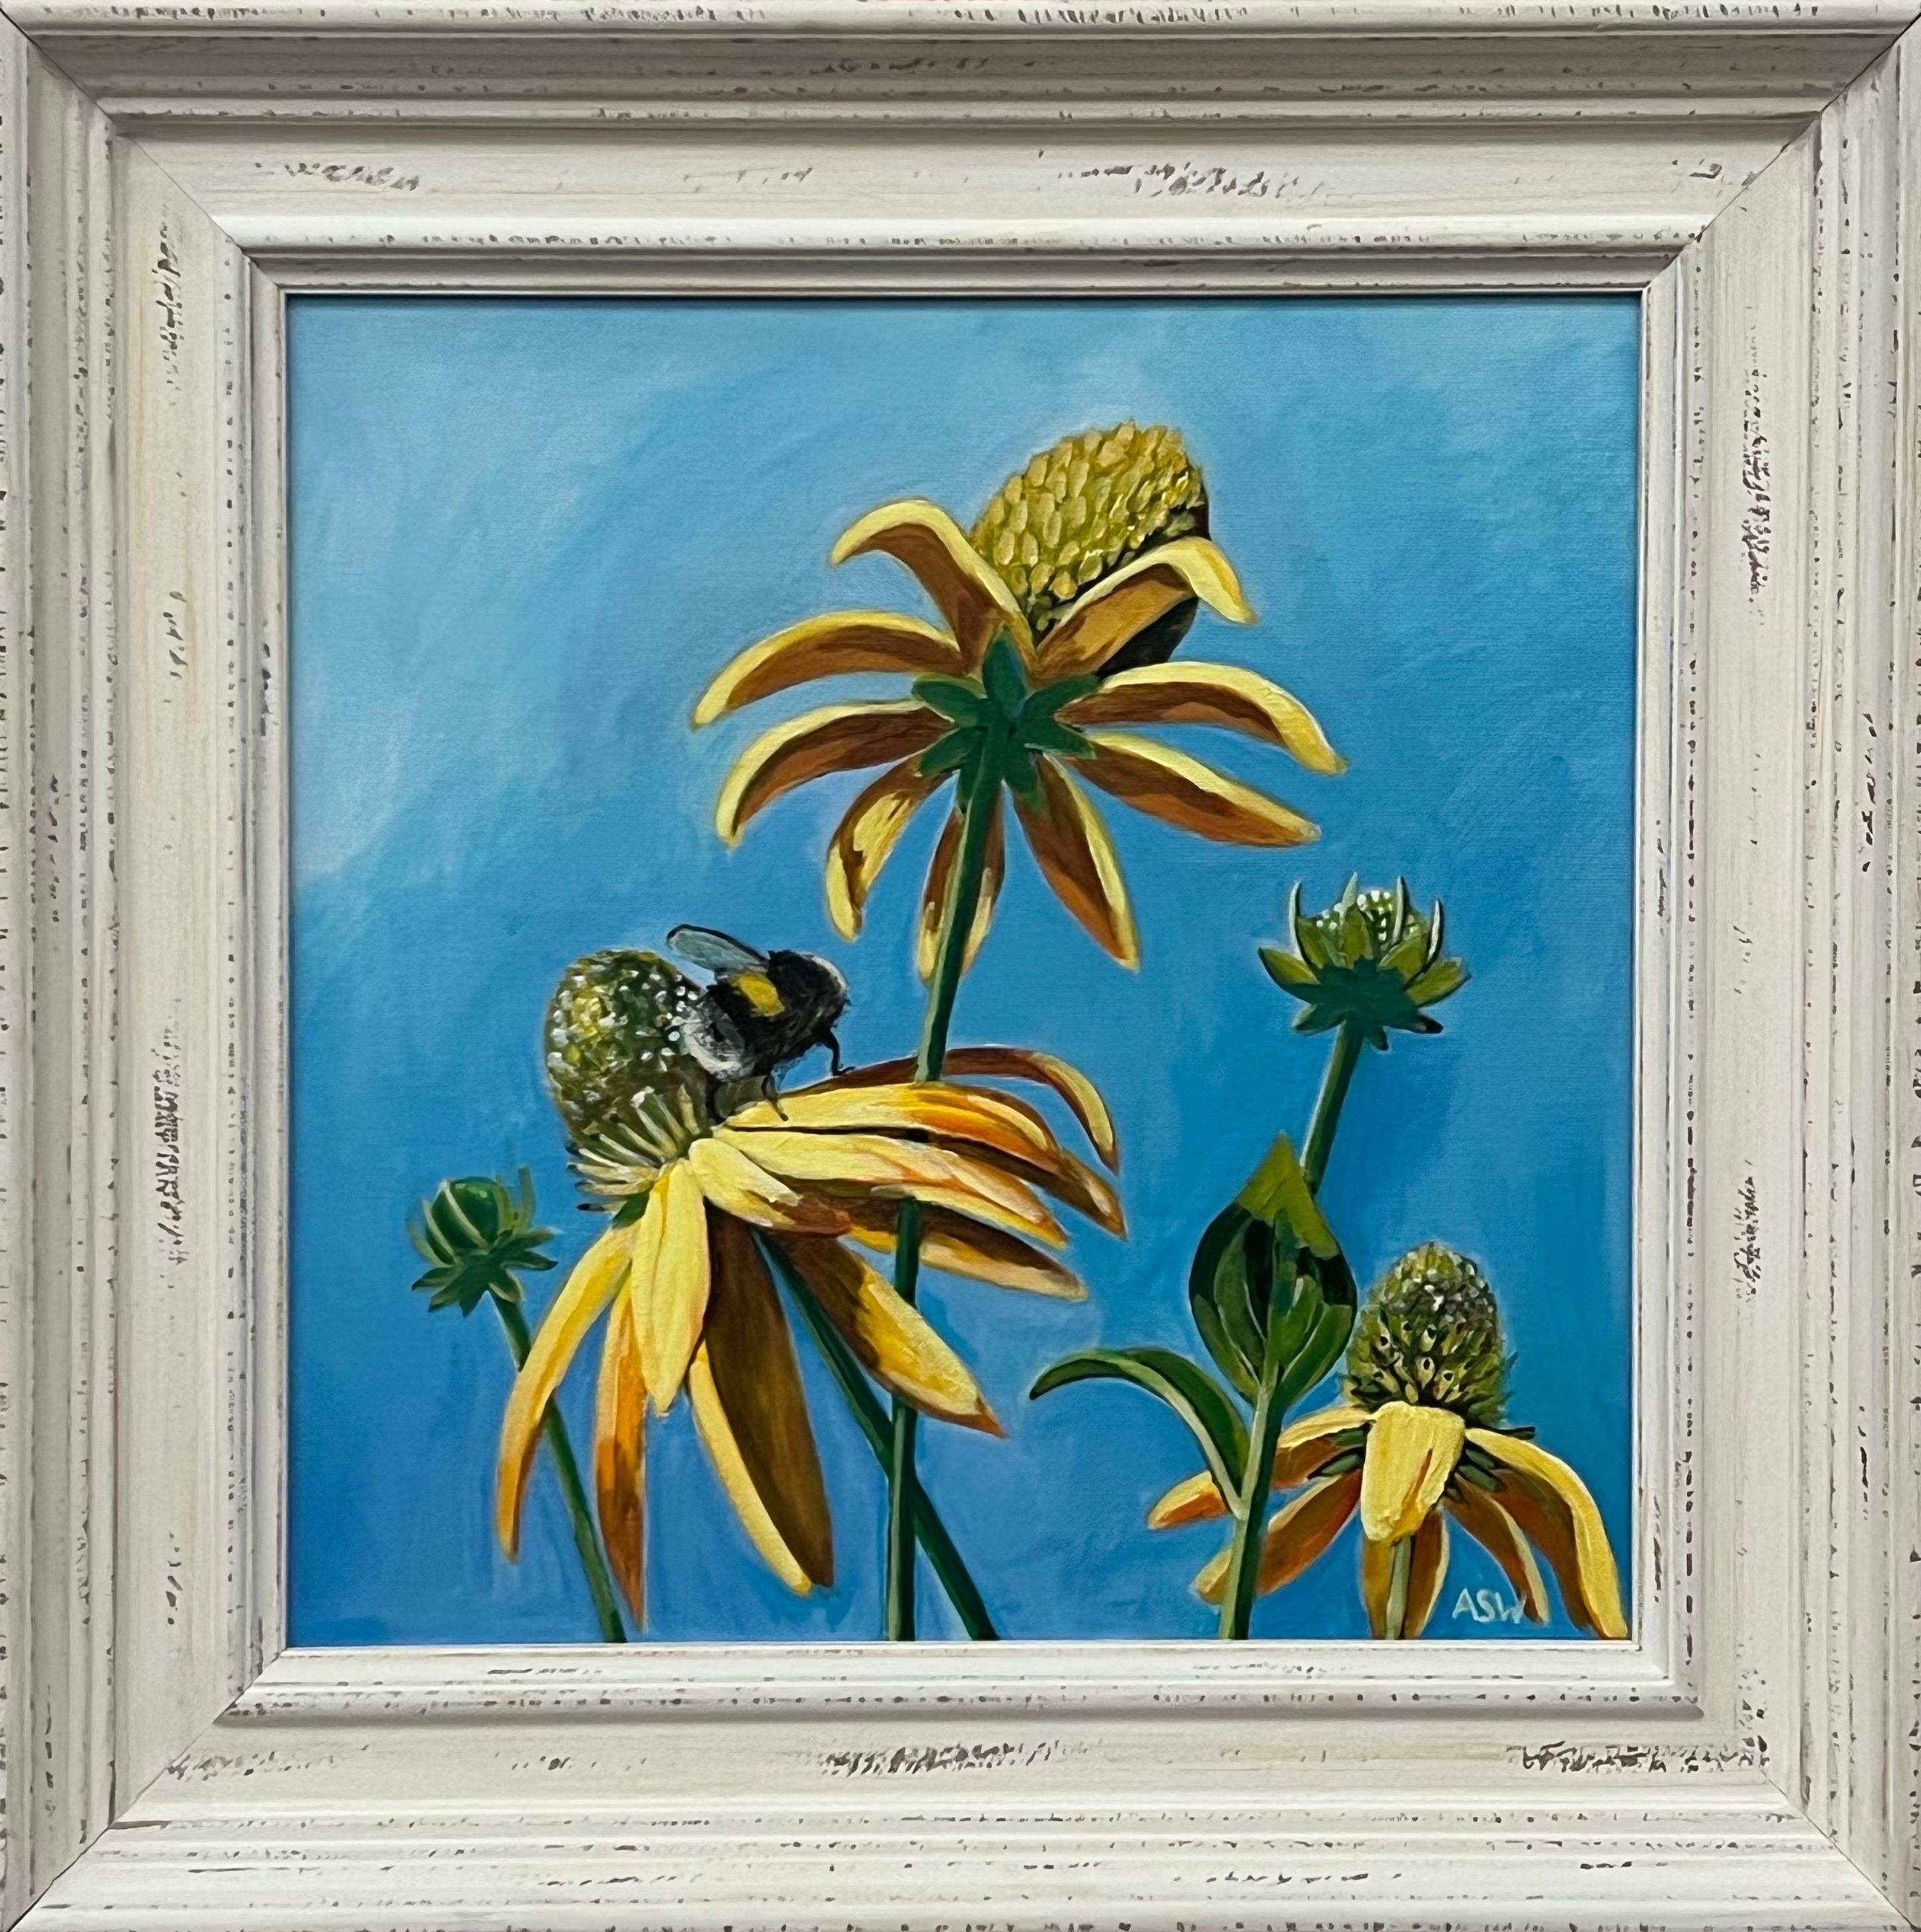 English Country Garden Landscape Art with Bee on Flowers by Contemporary Artist